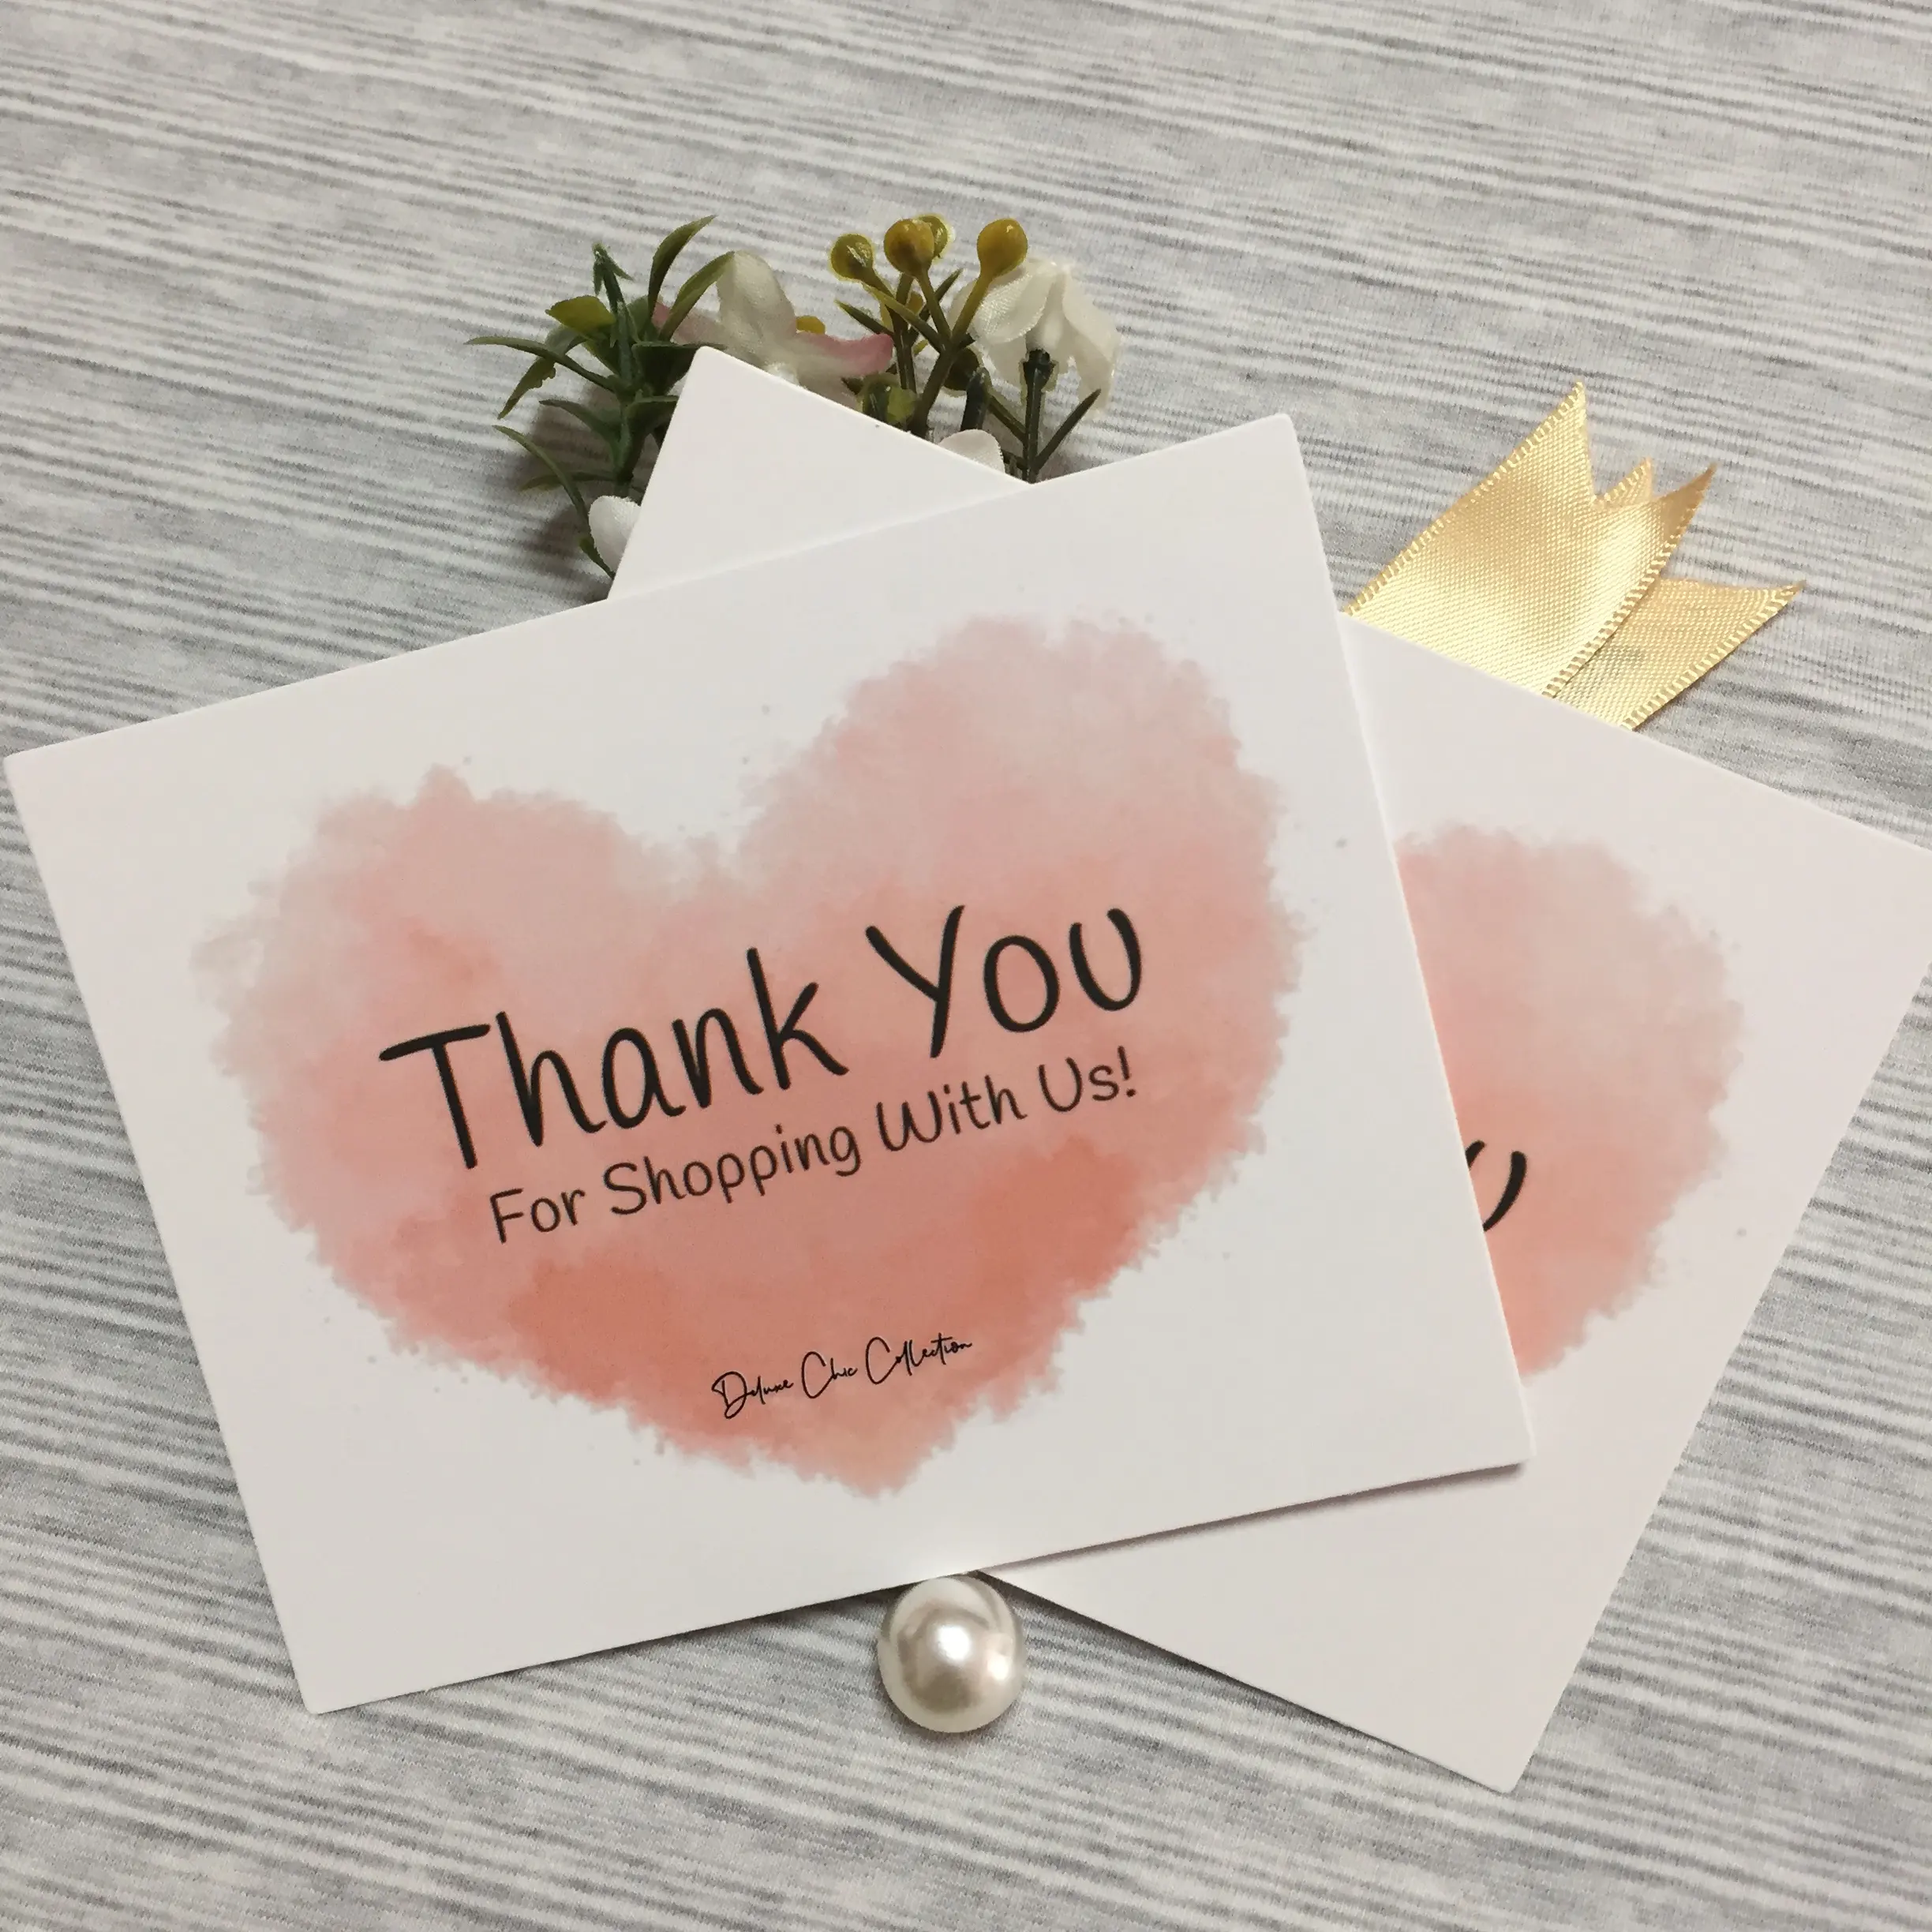 Custom Logo High Quality birthday cards Thank You Cards for small business